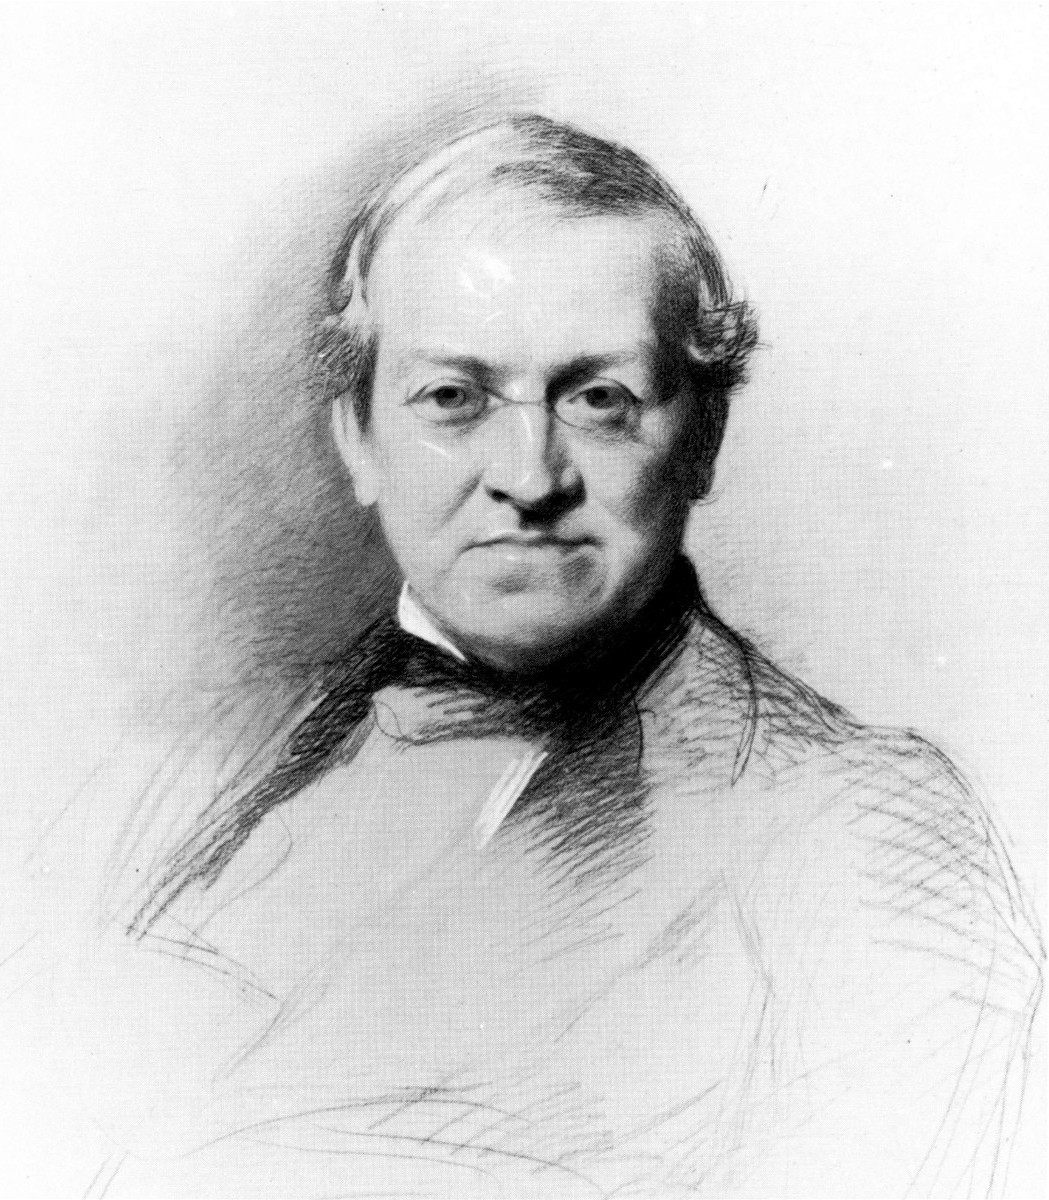 A black-and-white sketch of Charles Wheatstone.